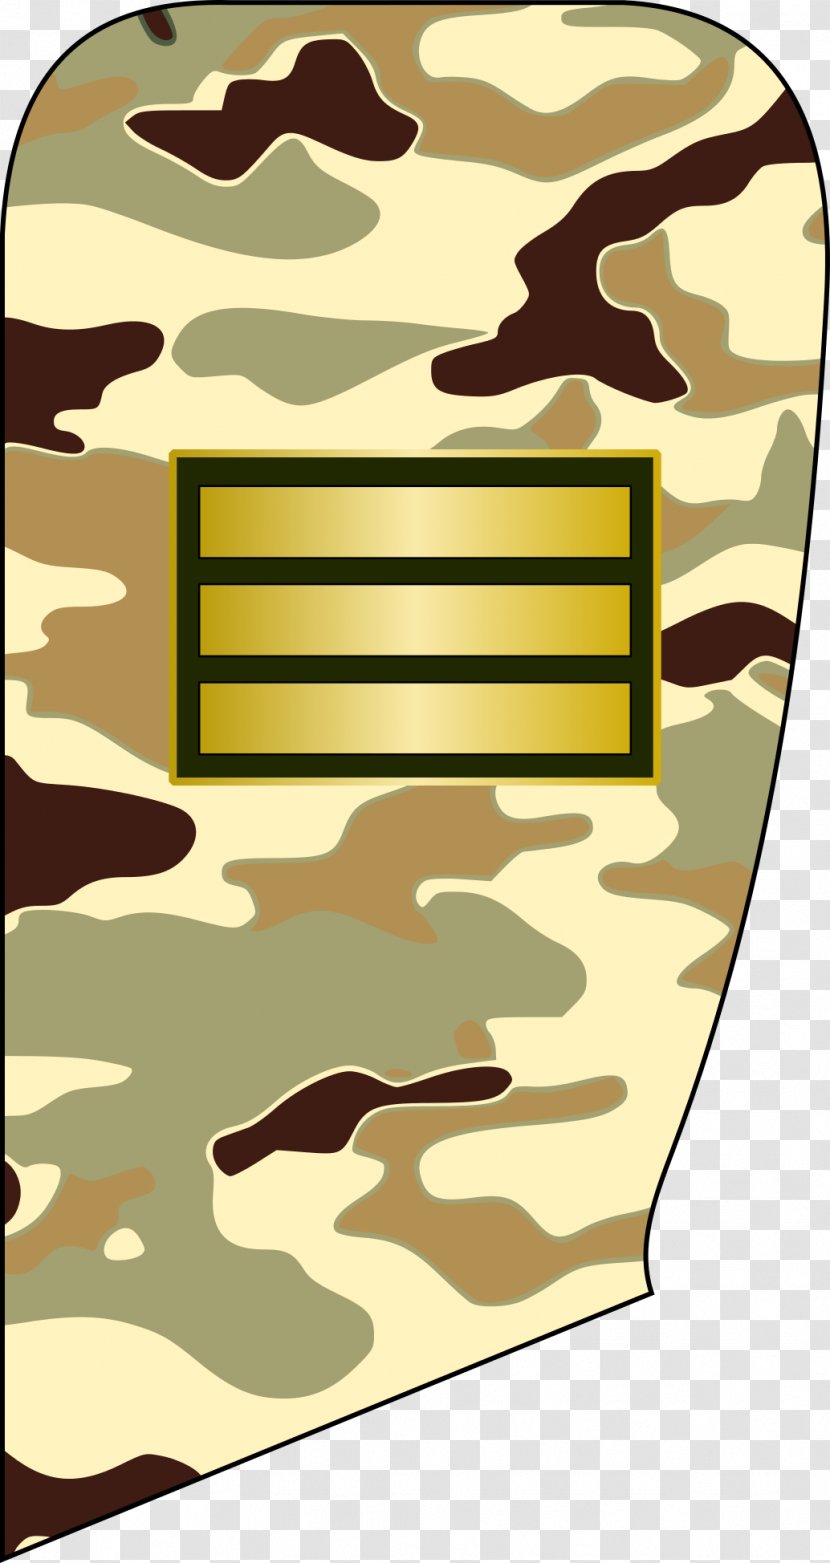 Iran Soldier Military Rank Private - Islamic Republic Of Army Ground Forces - Enlisted Transparent PNG